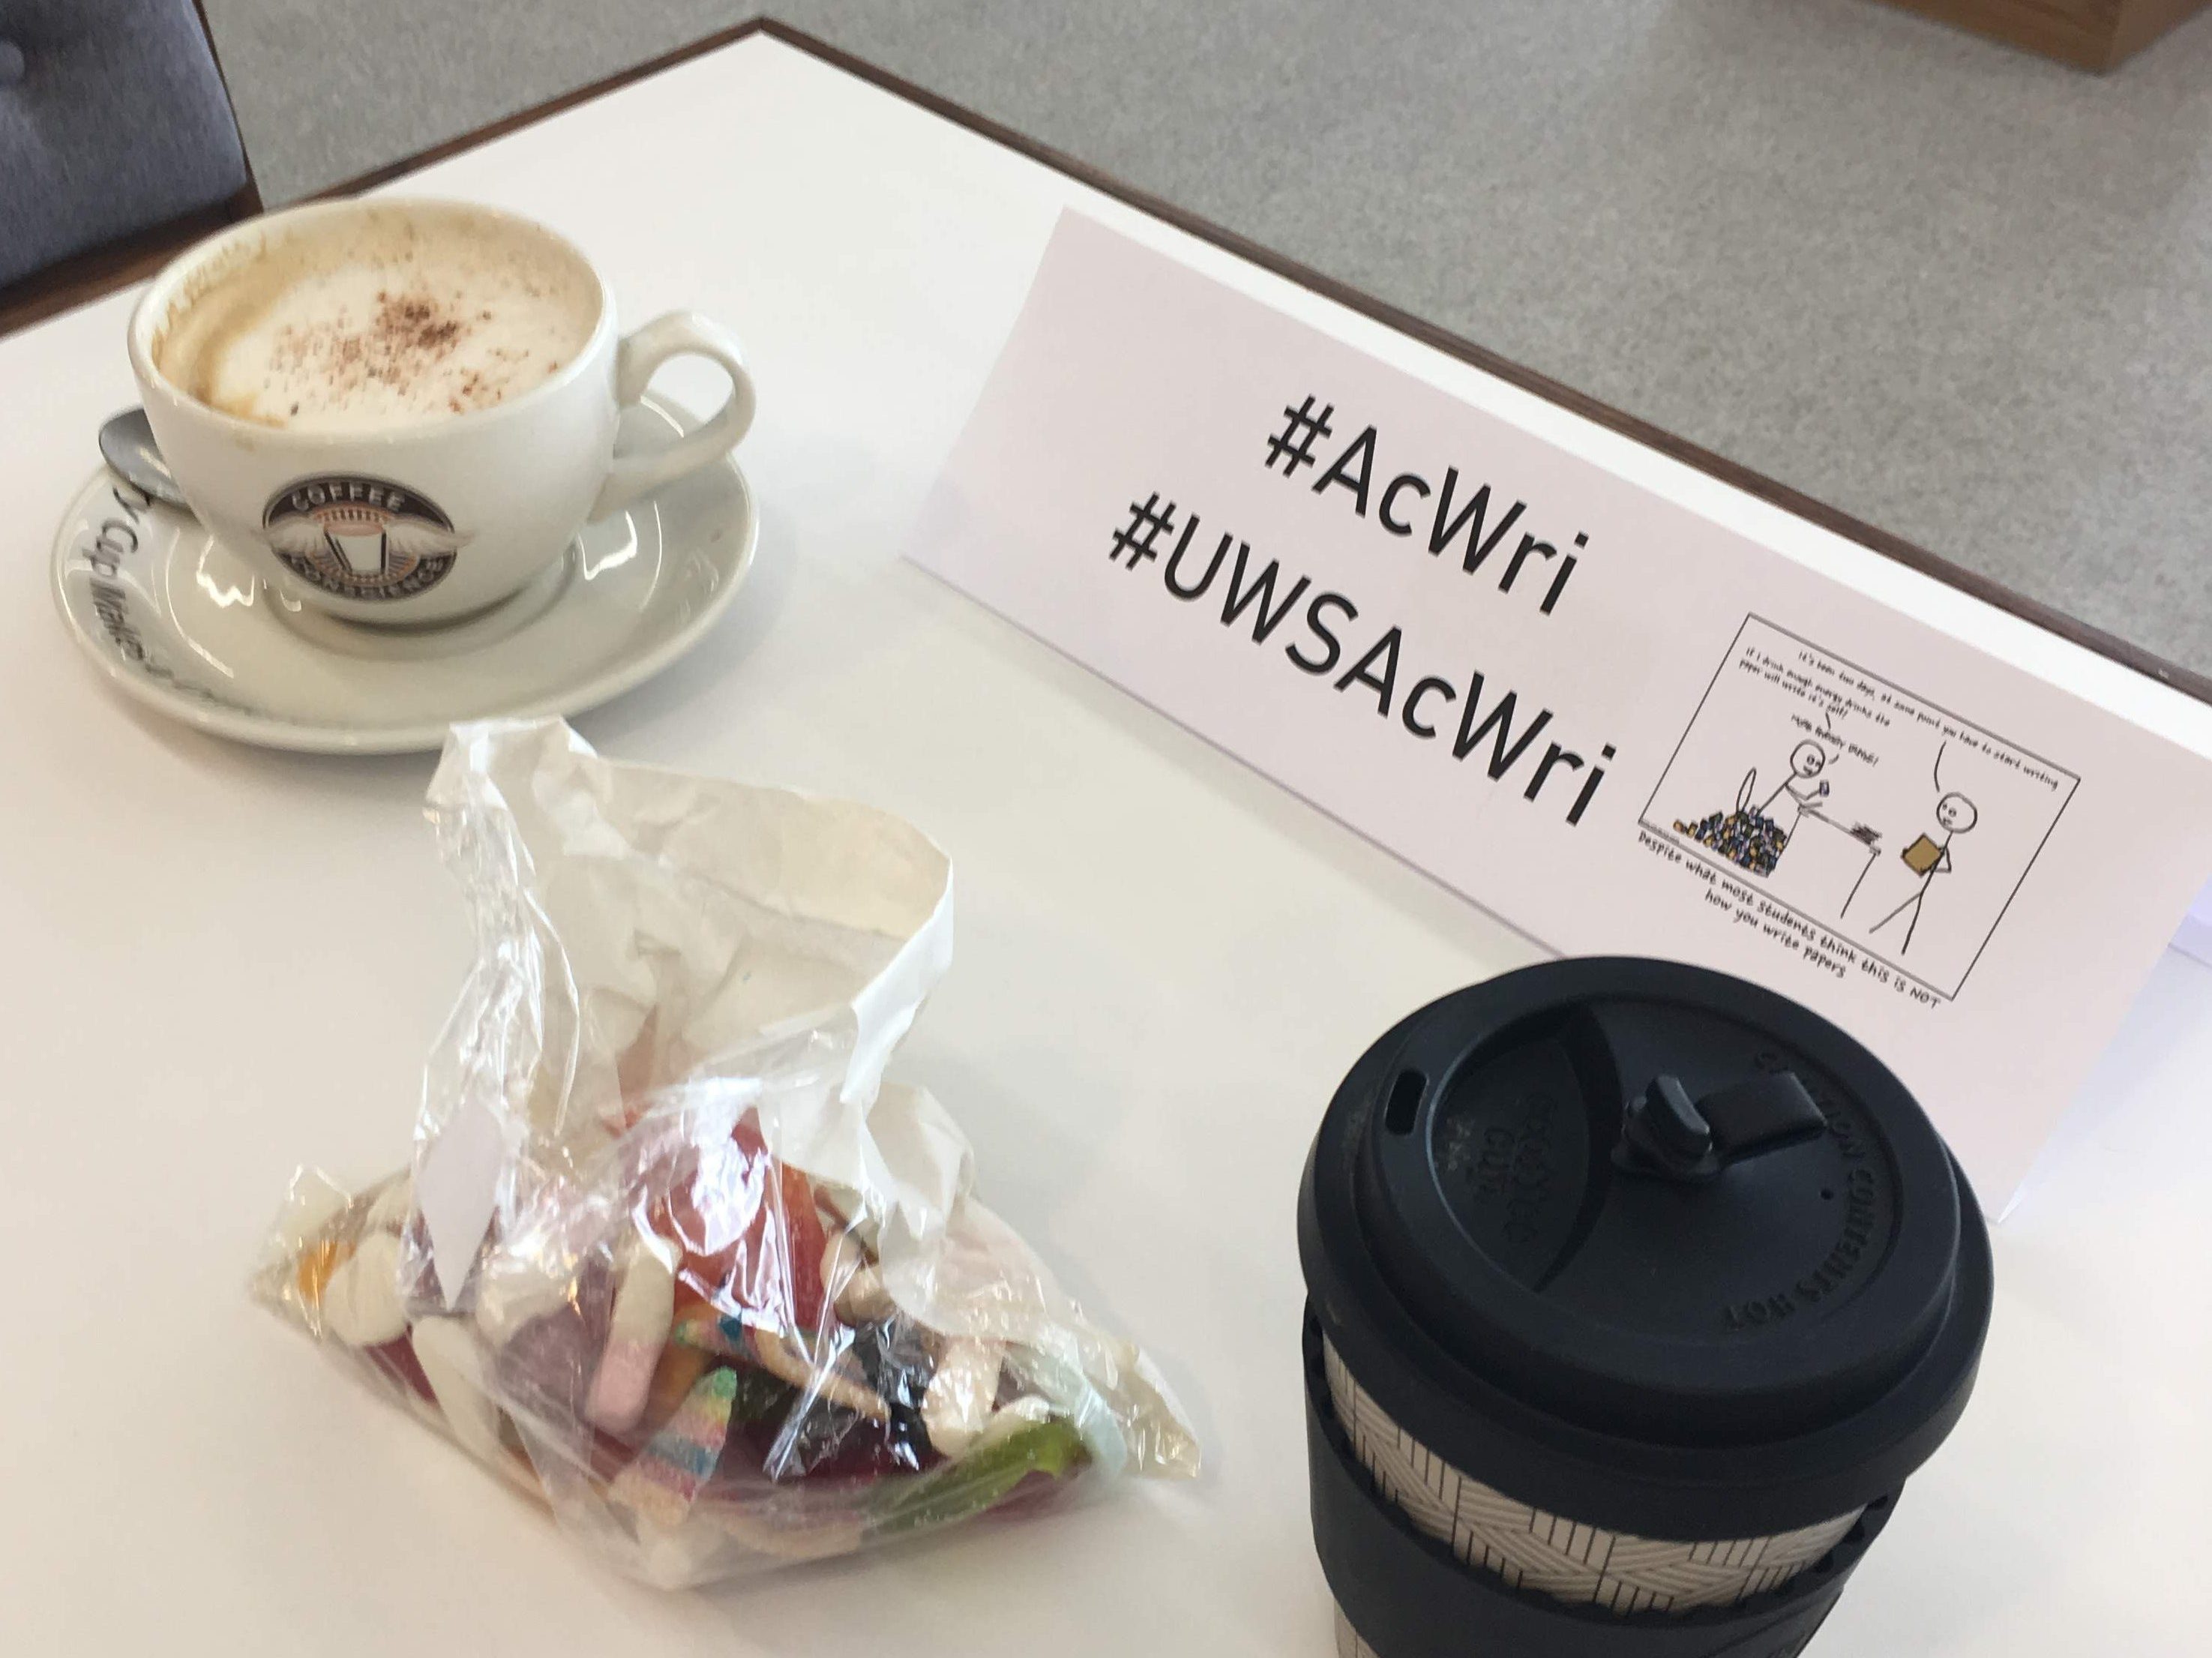 Two coffee cups on a table (one take away cup, one a ceramic one), a bag of sweets and the a sign advertising the writing group. 